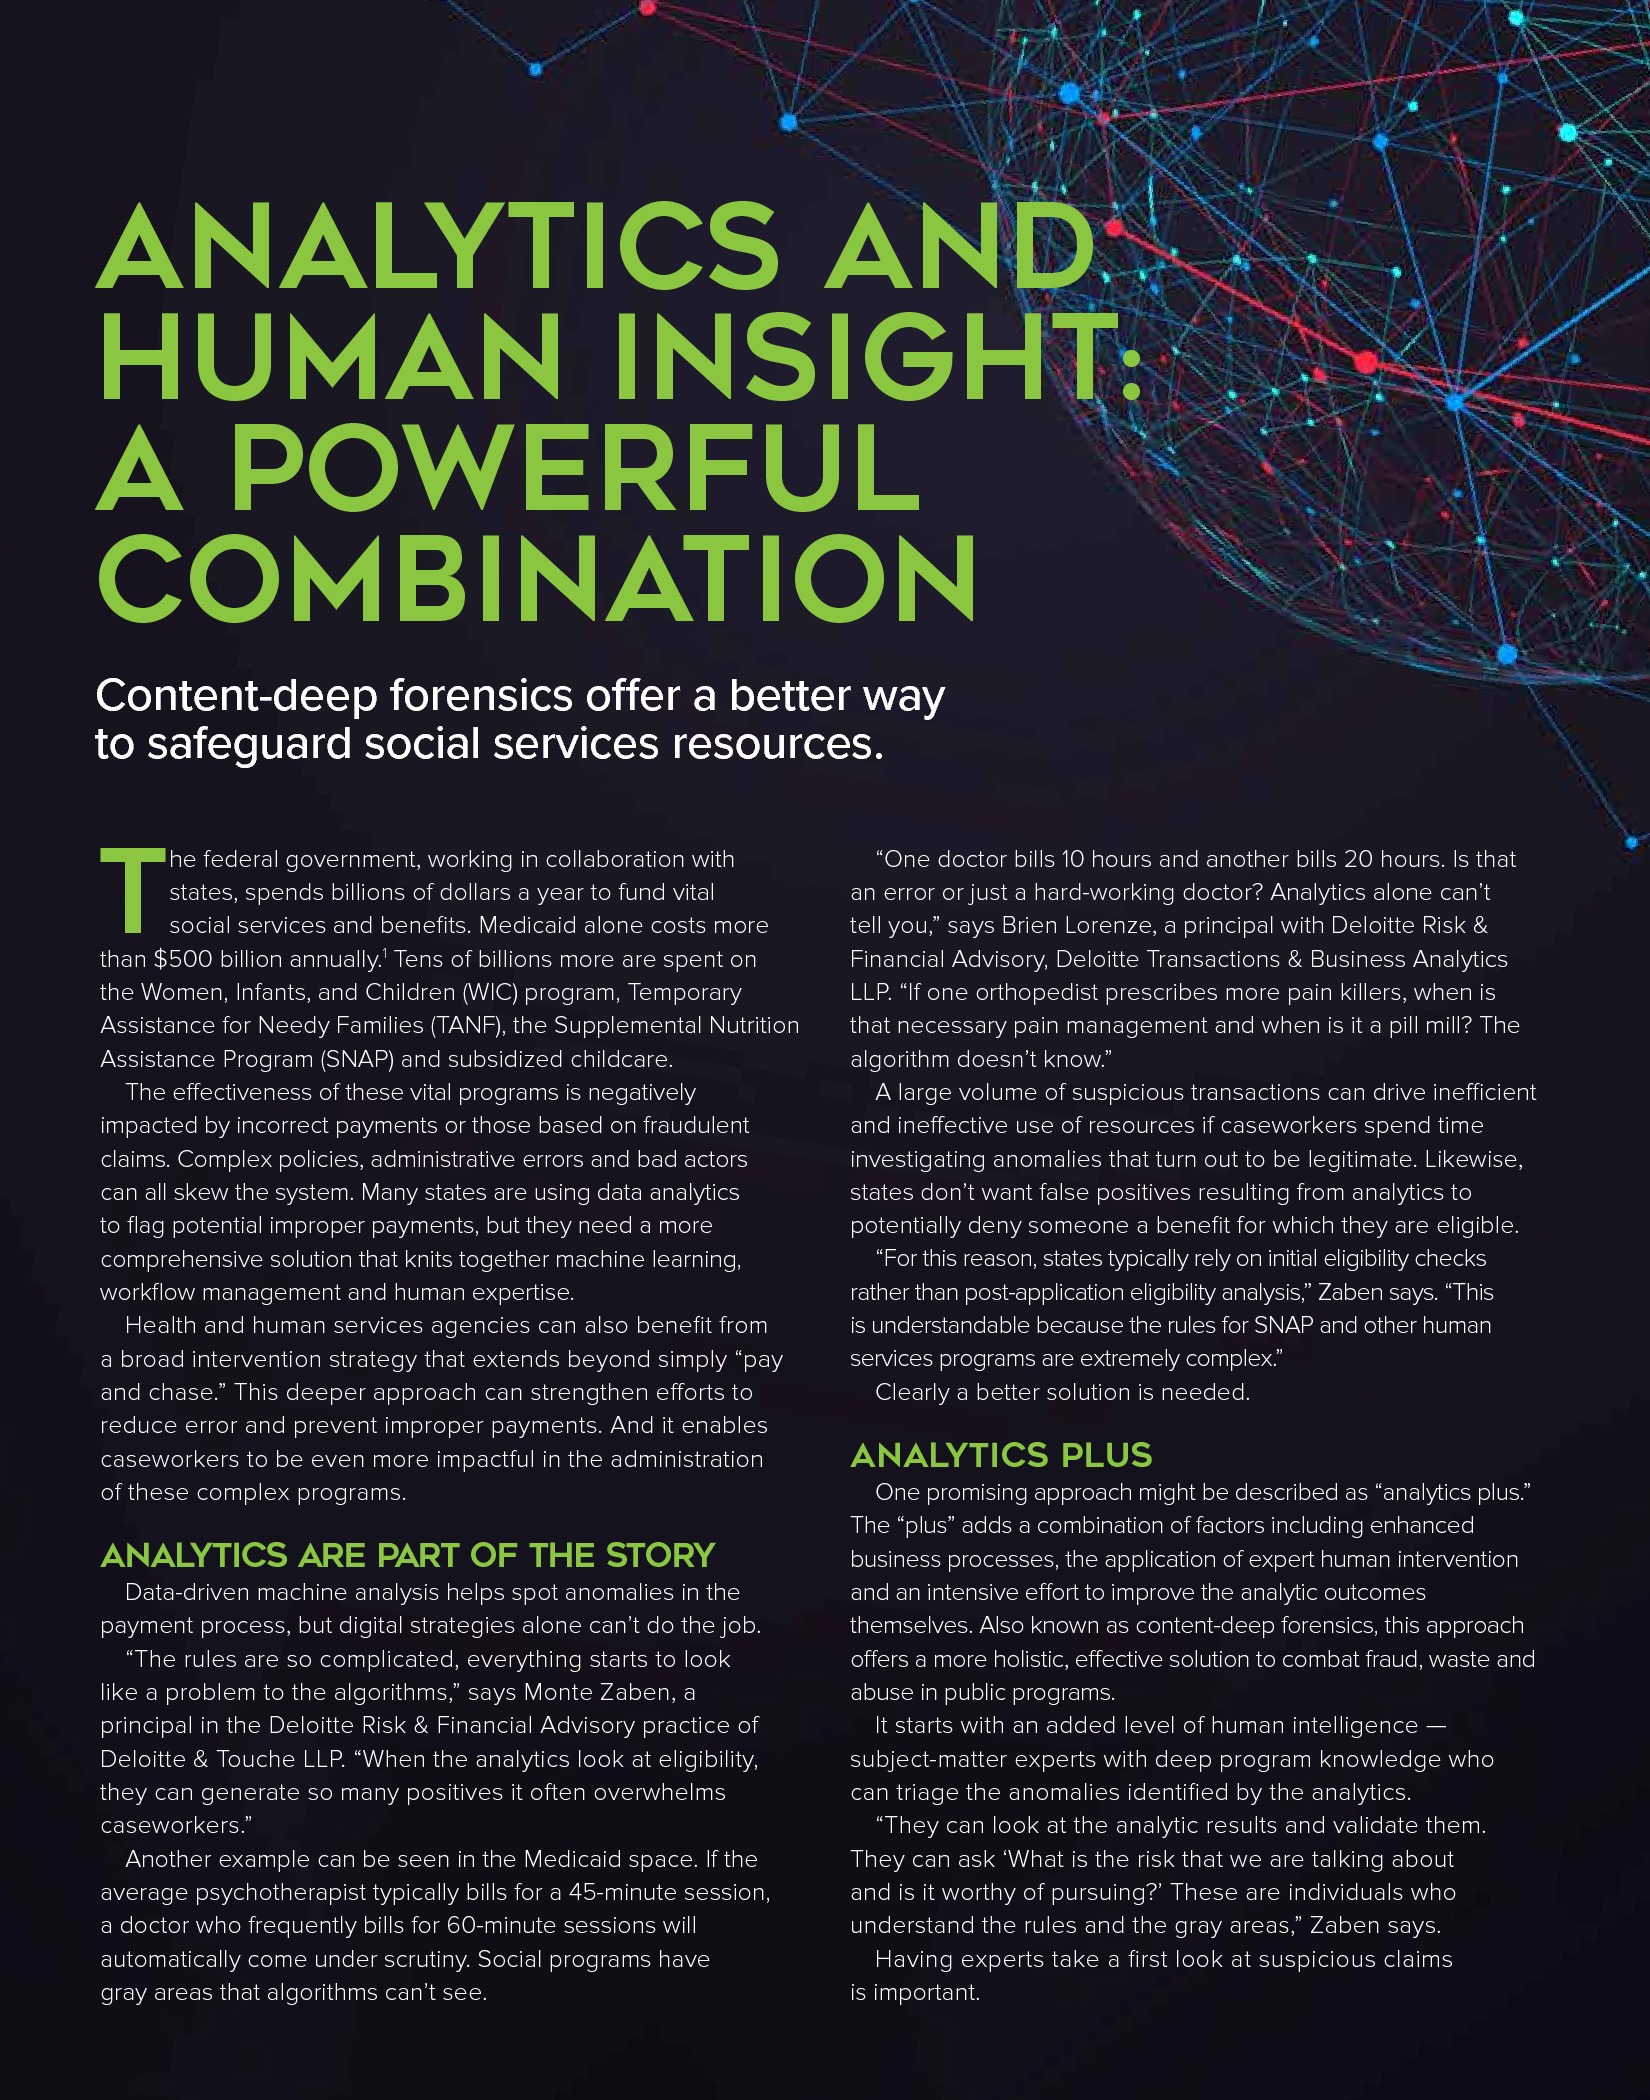 Analytics and Human Insight: A Powerful Combination